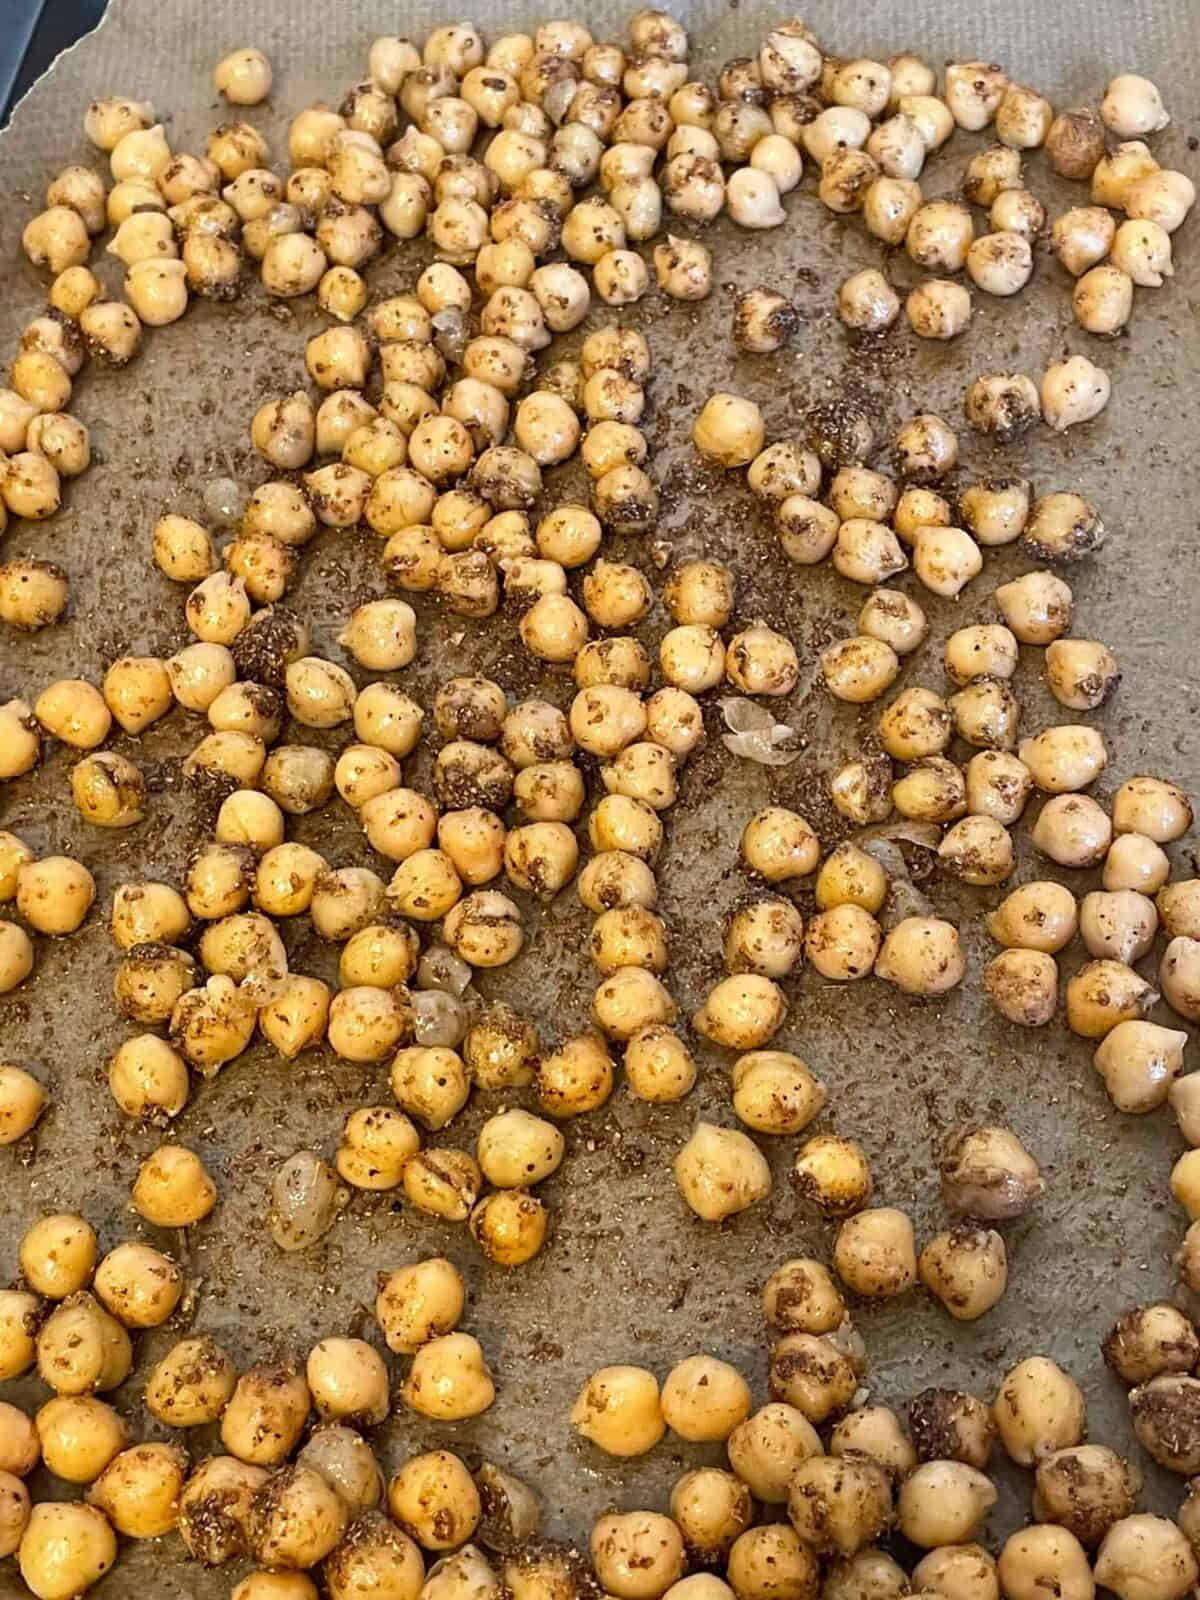 Chickpeas mixed with spices and placed on baking tray.